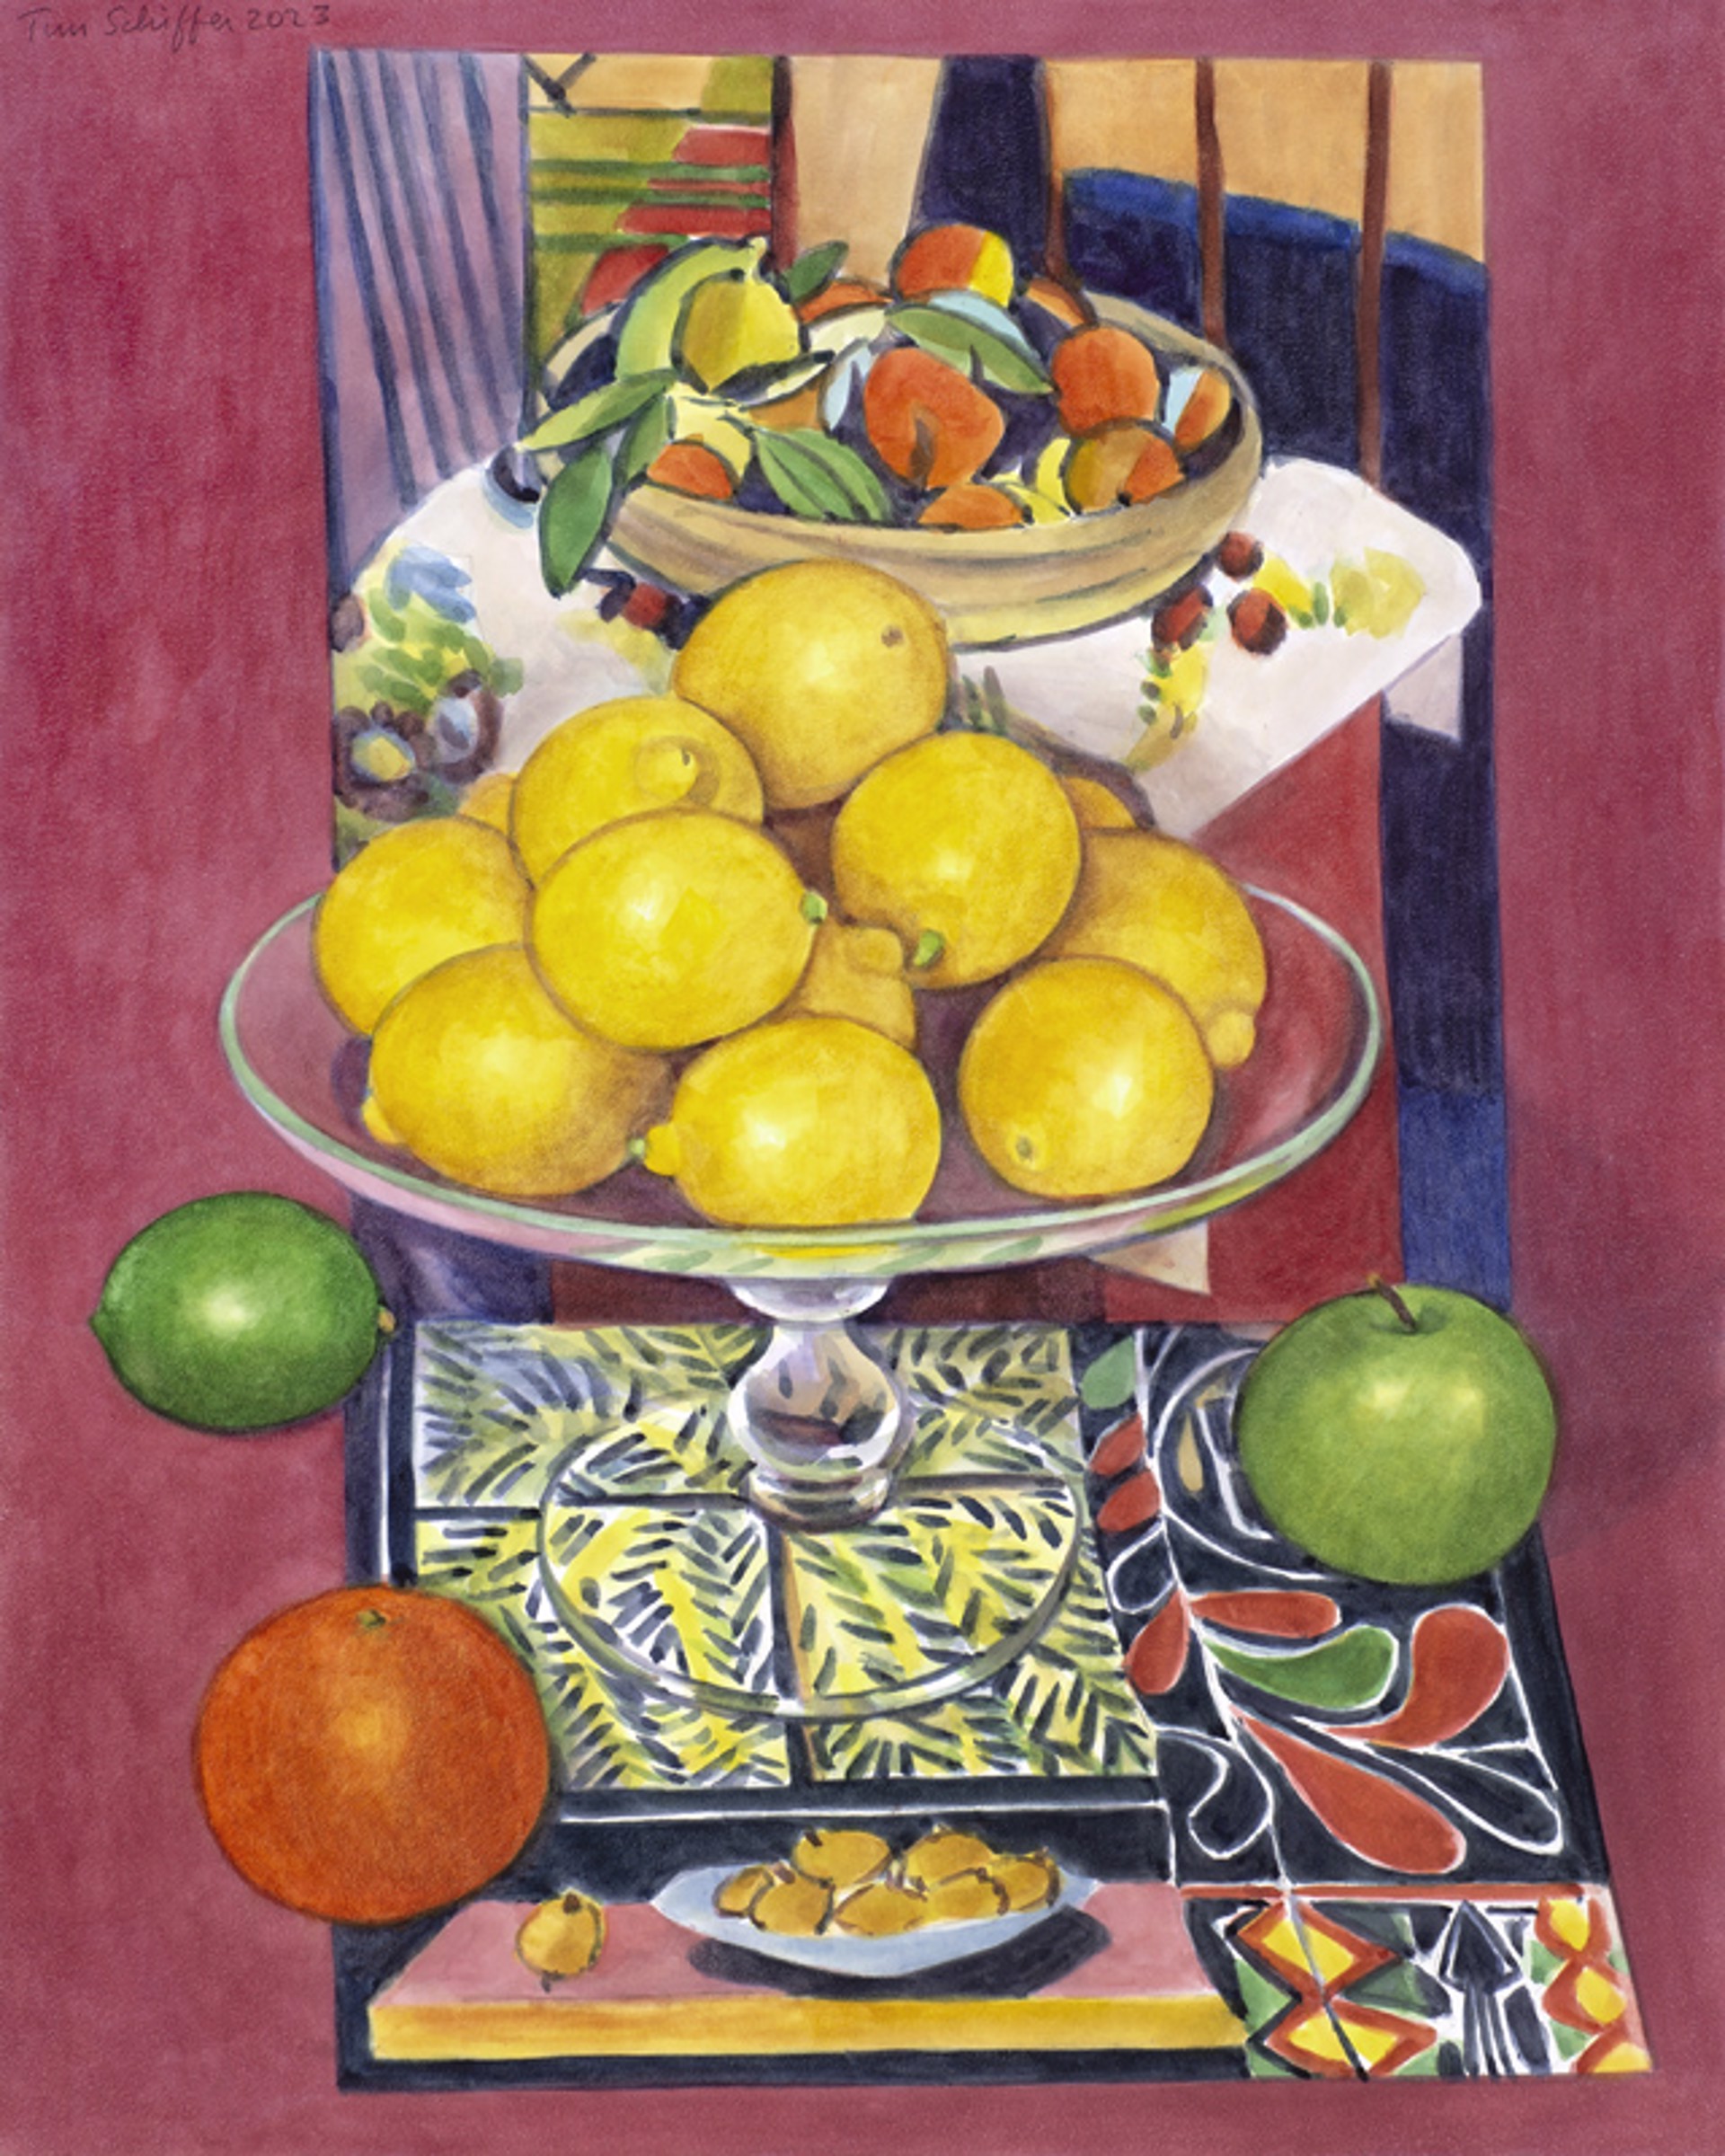 Lemons with Two Paintings by Matisse by Tim Schiffer